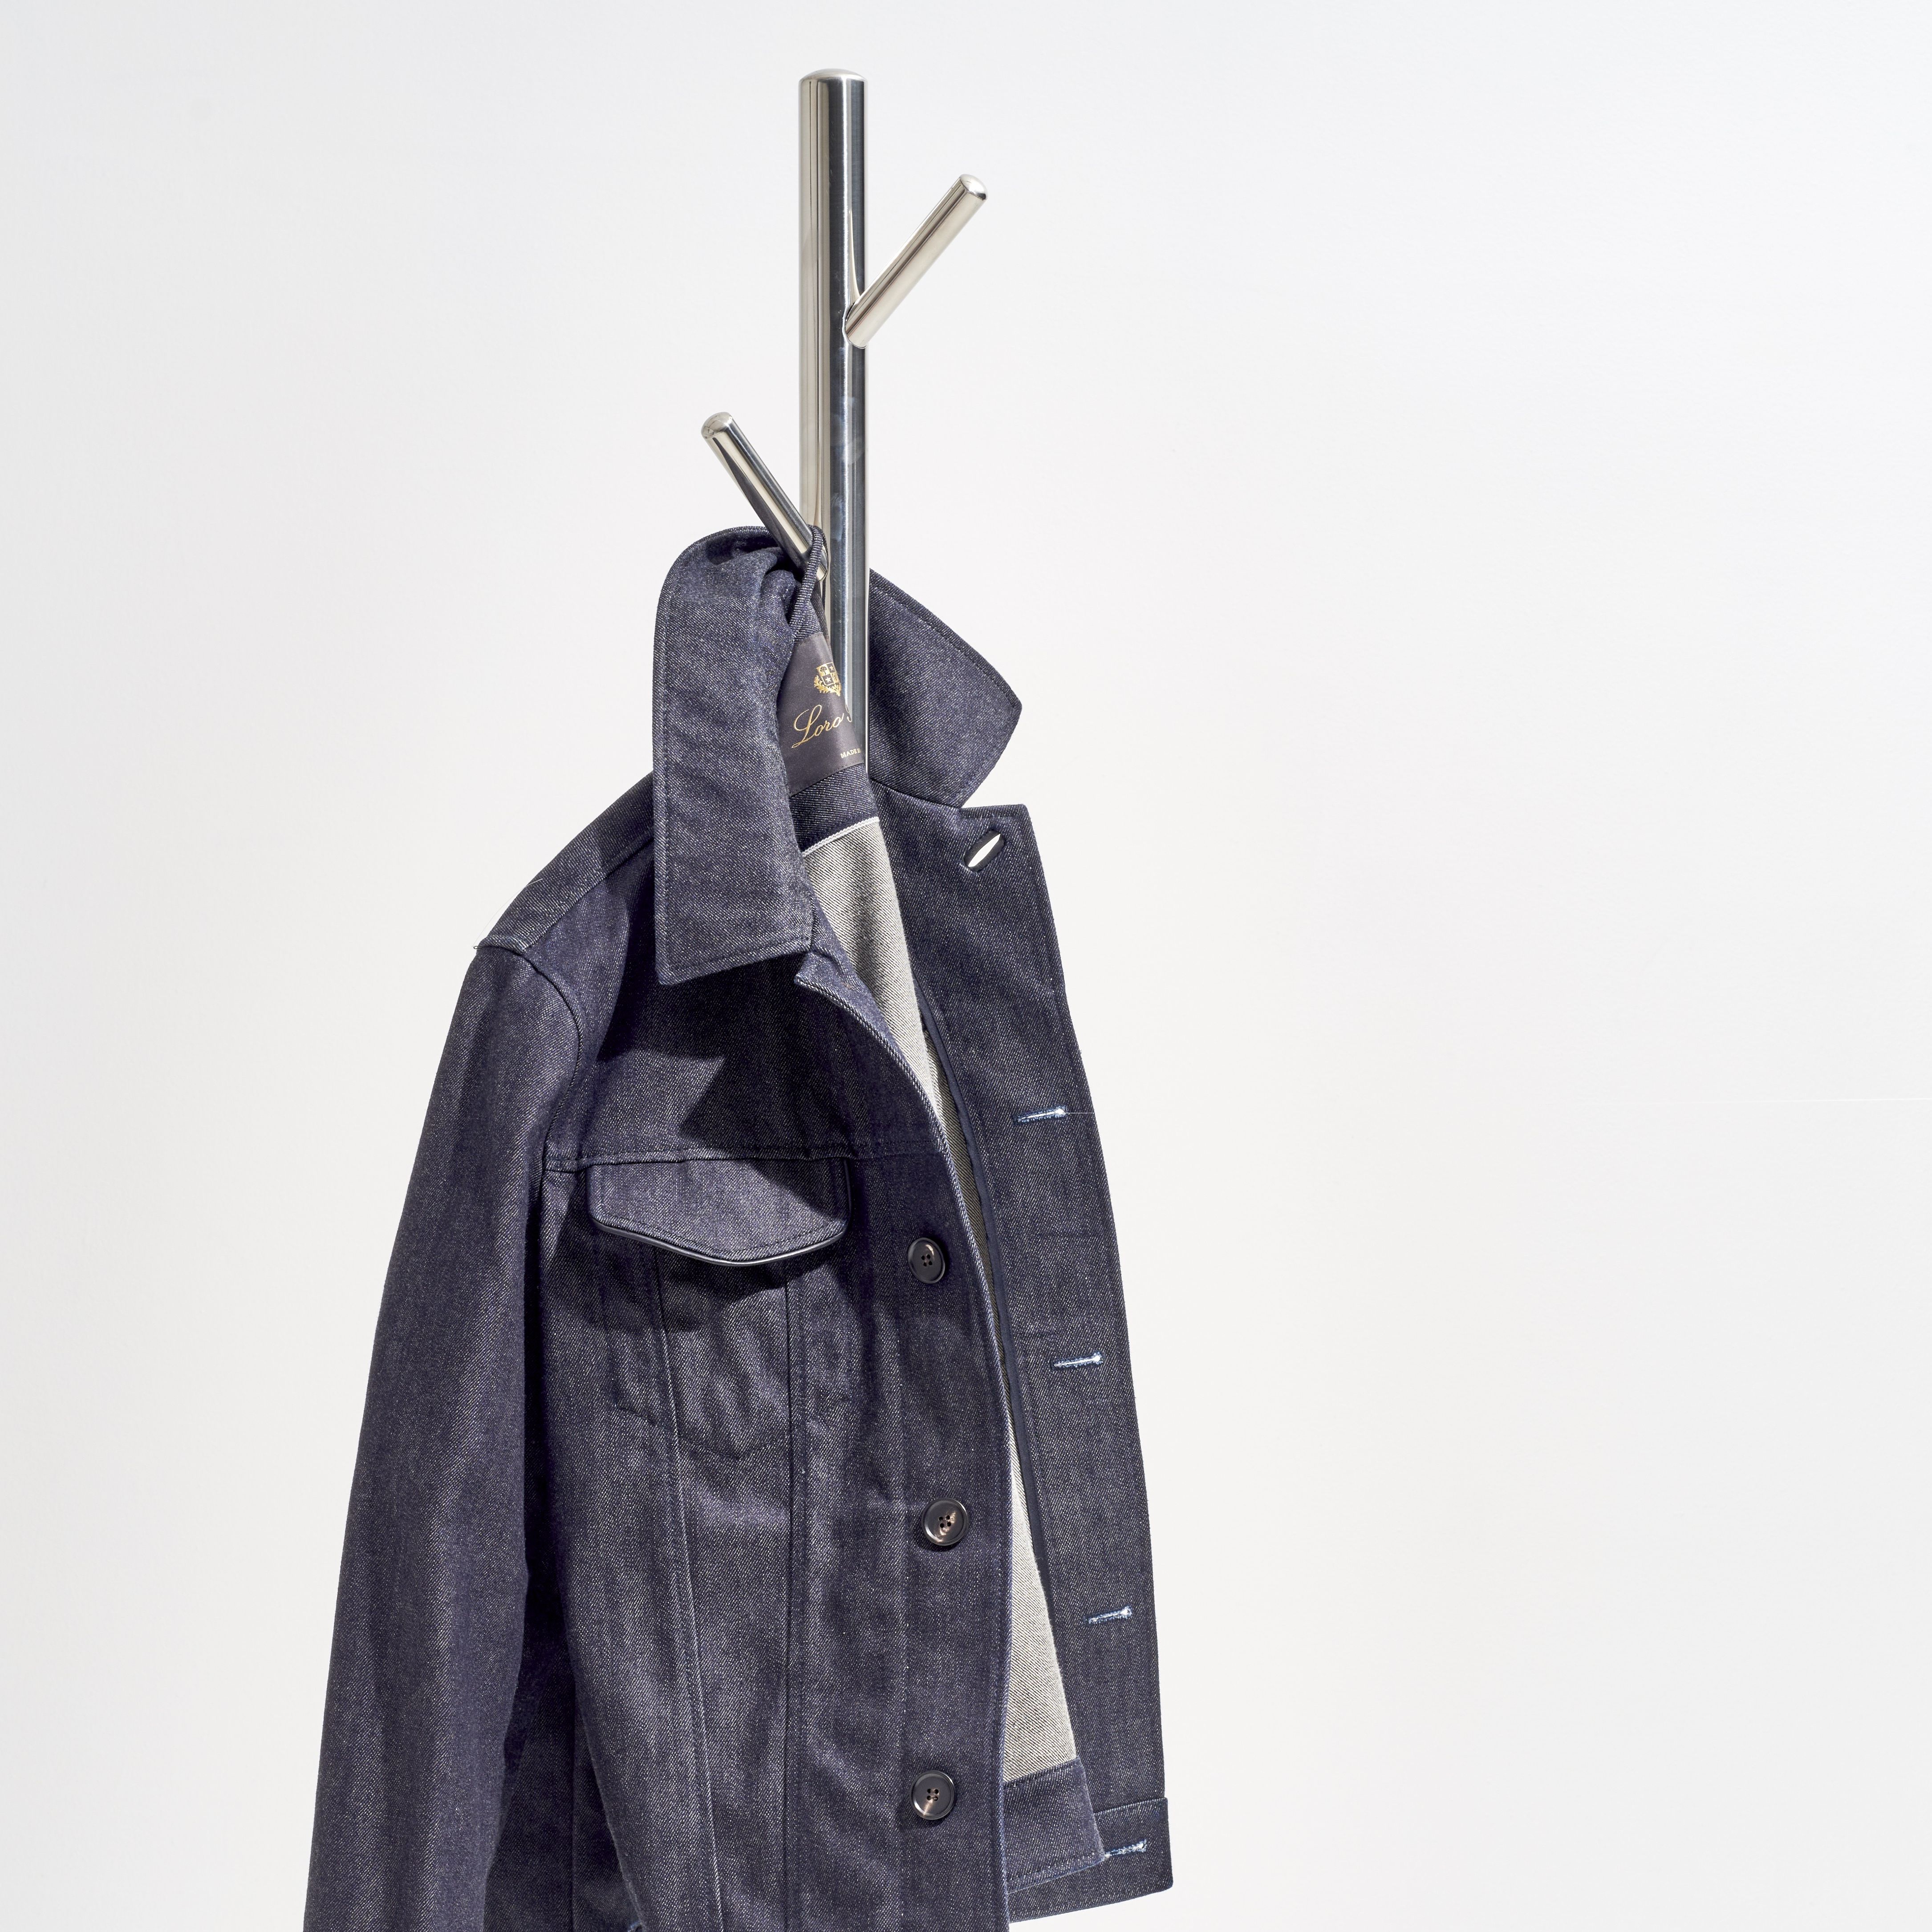 The Most Luxurious Denim Jacket You'll Ever Wear